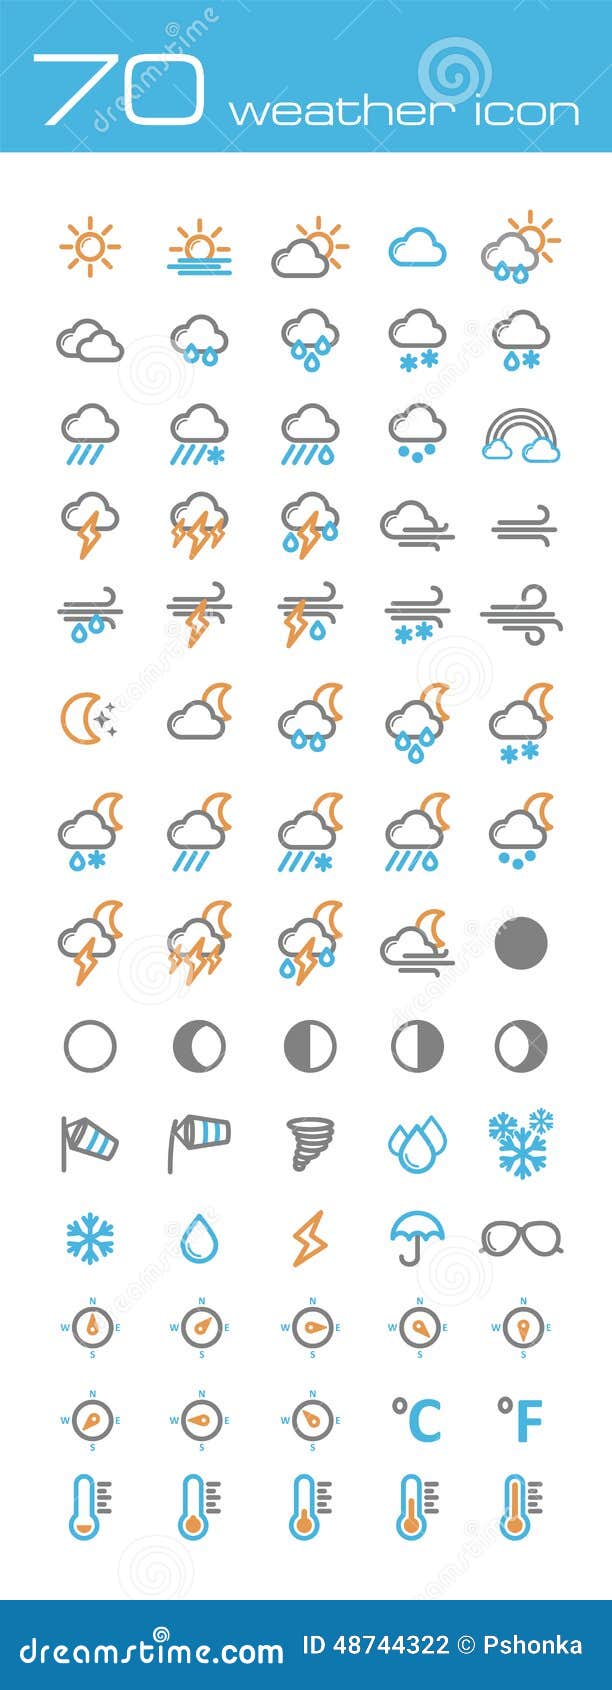 The modern weather icons set, eps 10